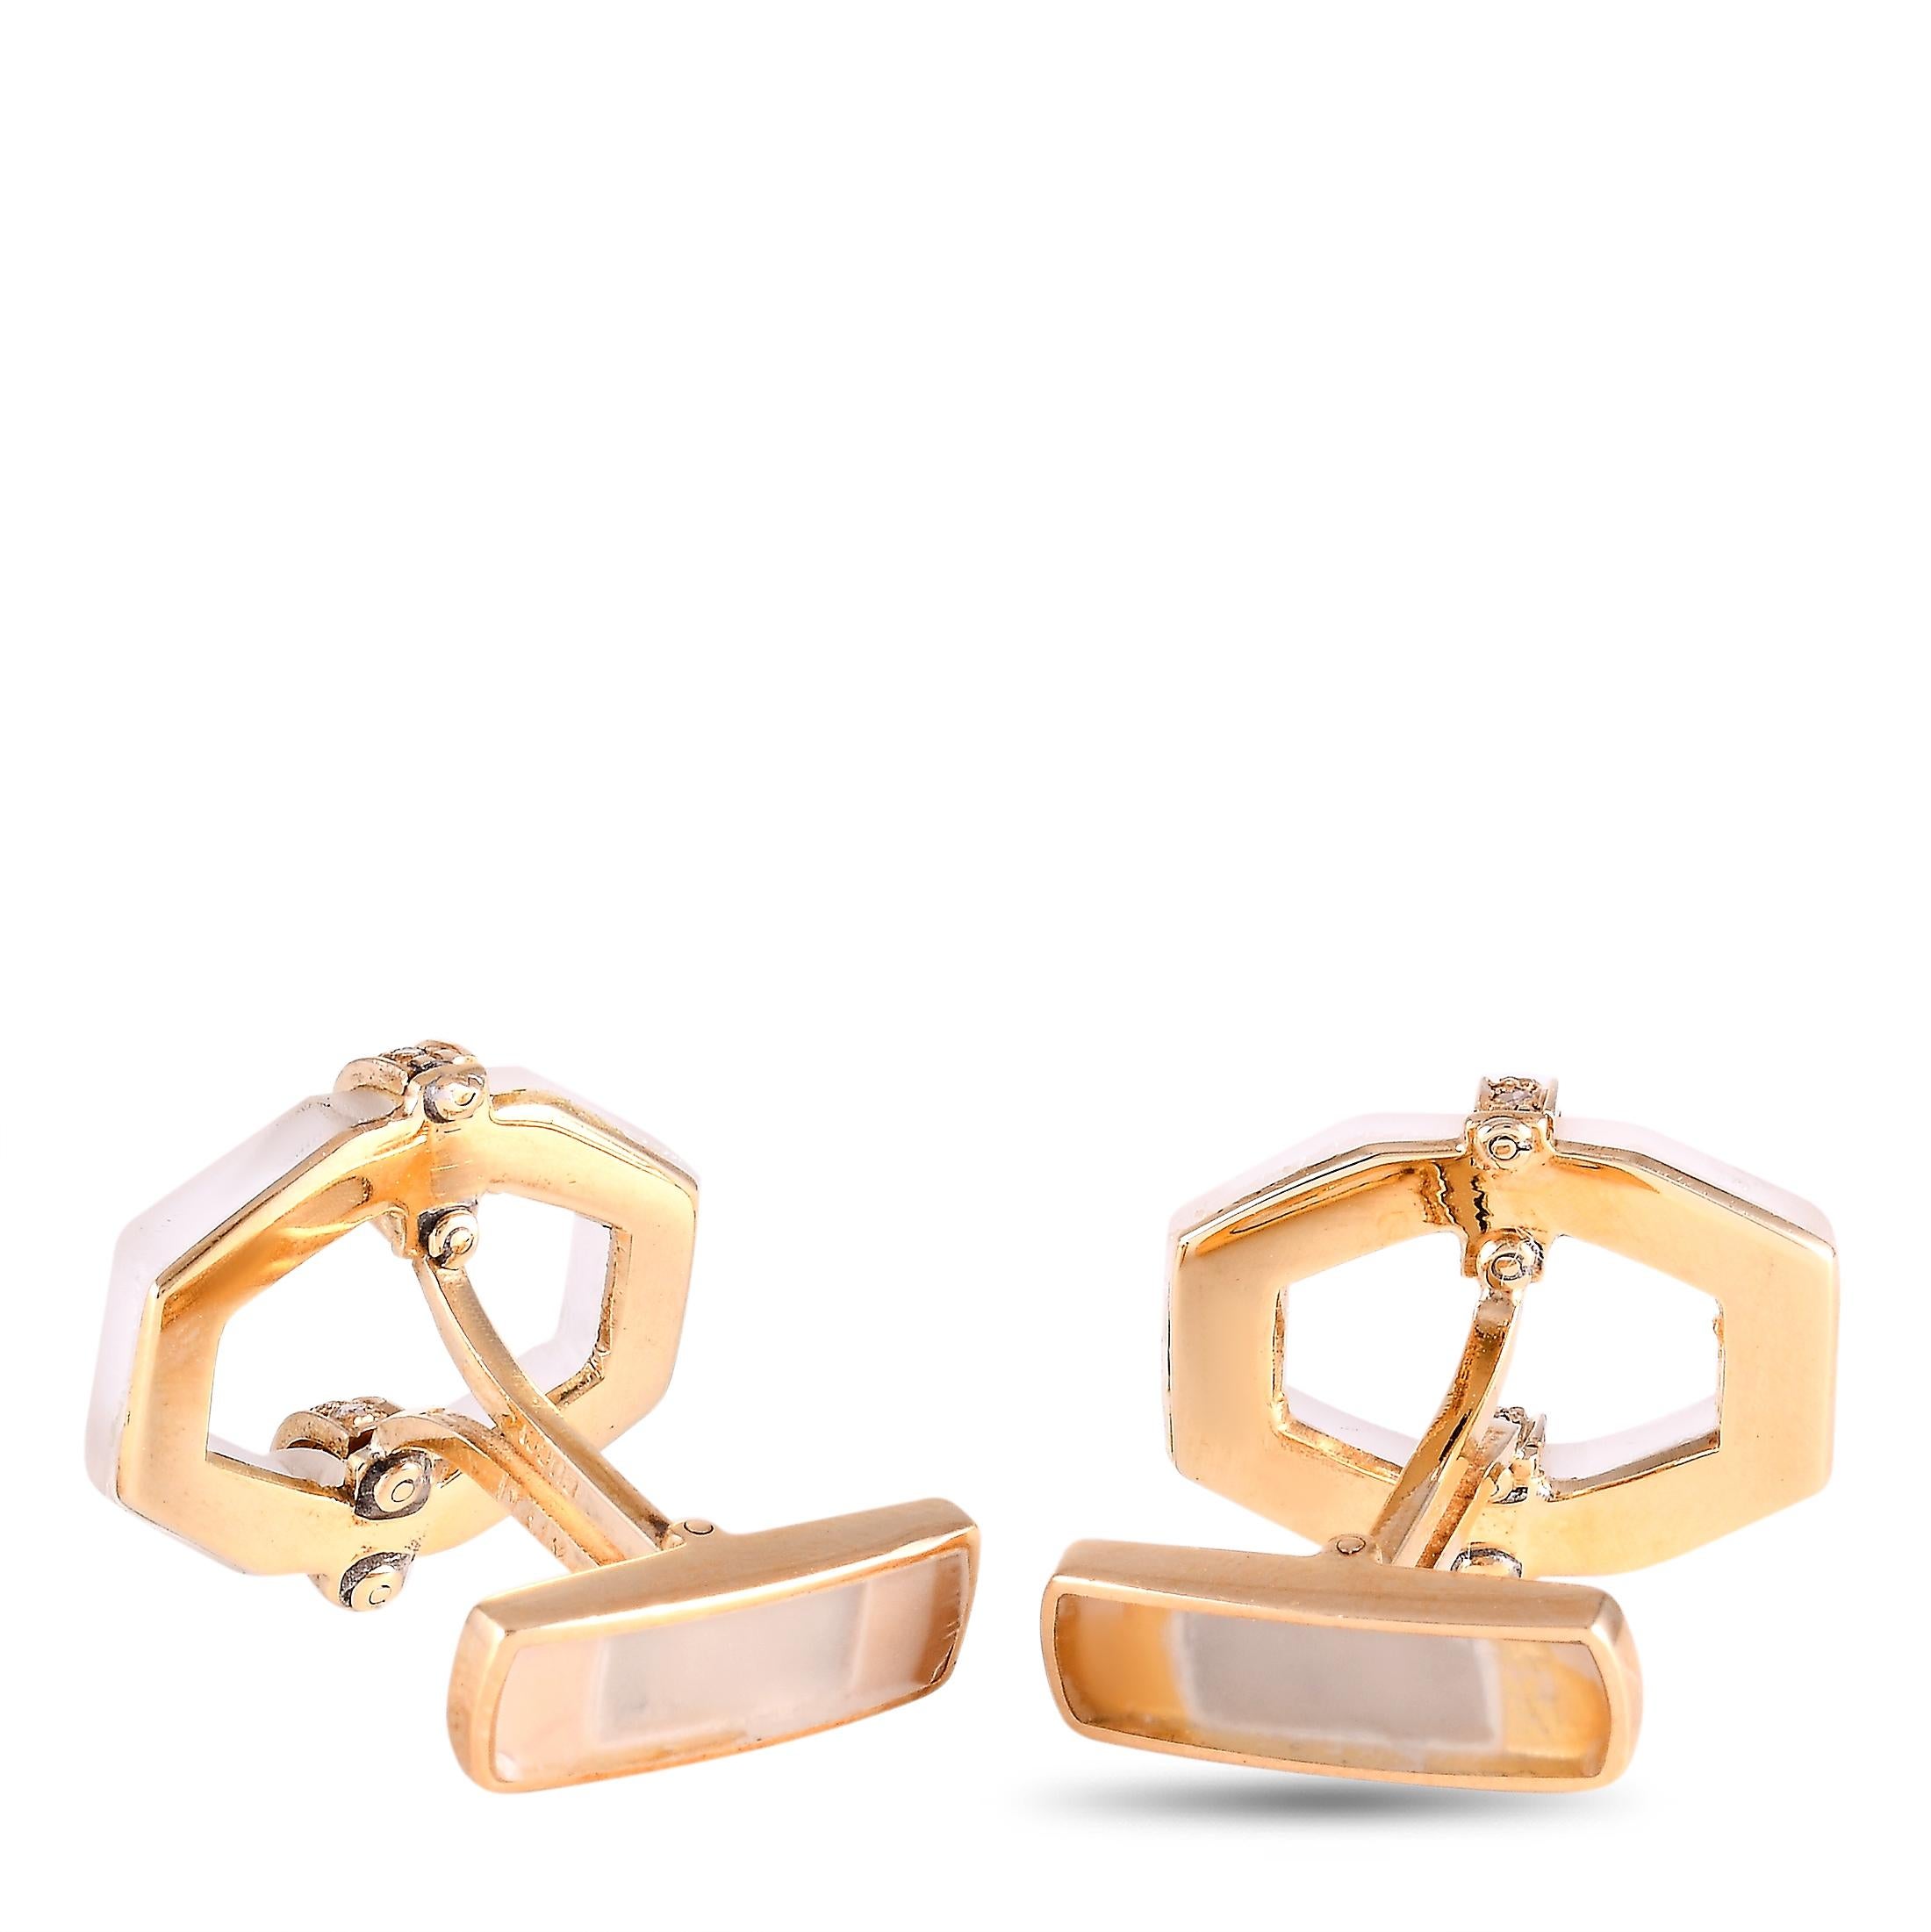 These Gucci cufflinks are made out of 18K yellow gold and crystal and embellished with diamonds. The cufflinks measure 0.60” in length and 0.60” in width, and each of the two weighs 5.3 grams.
 
 The pair is offered in estate condition.
